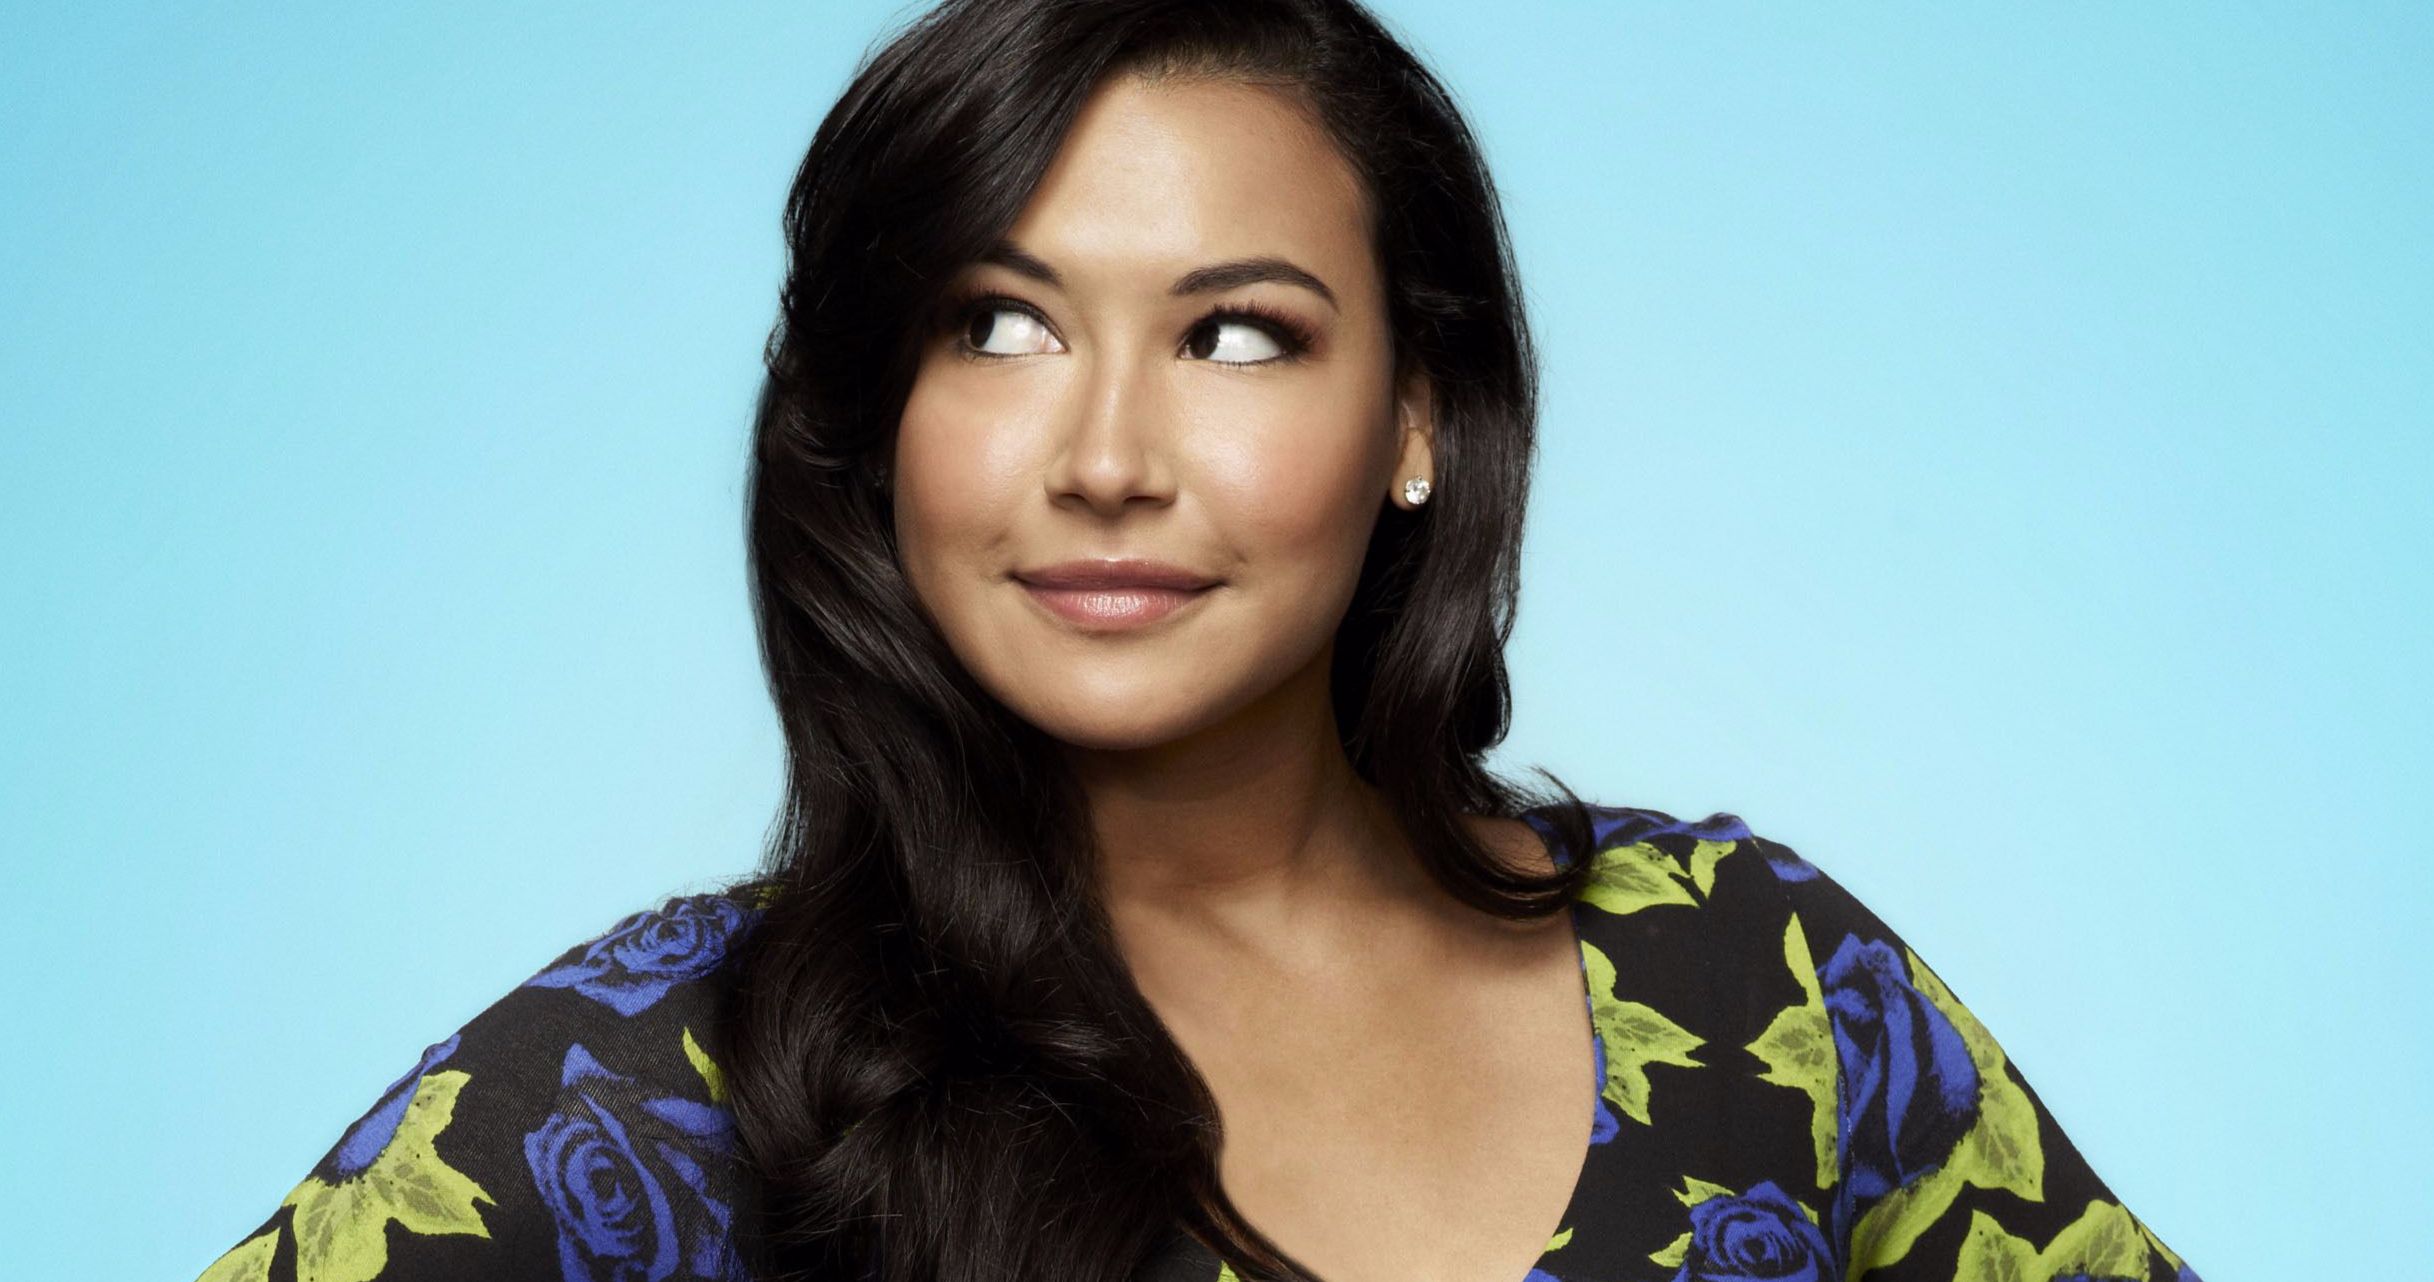 Naya Rivera's Cause of Death Has Been Ruled an Accidental Drowning